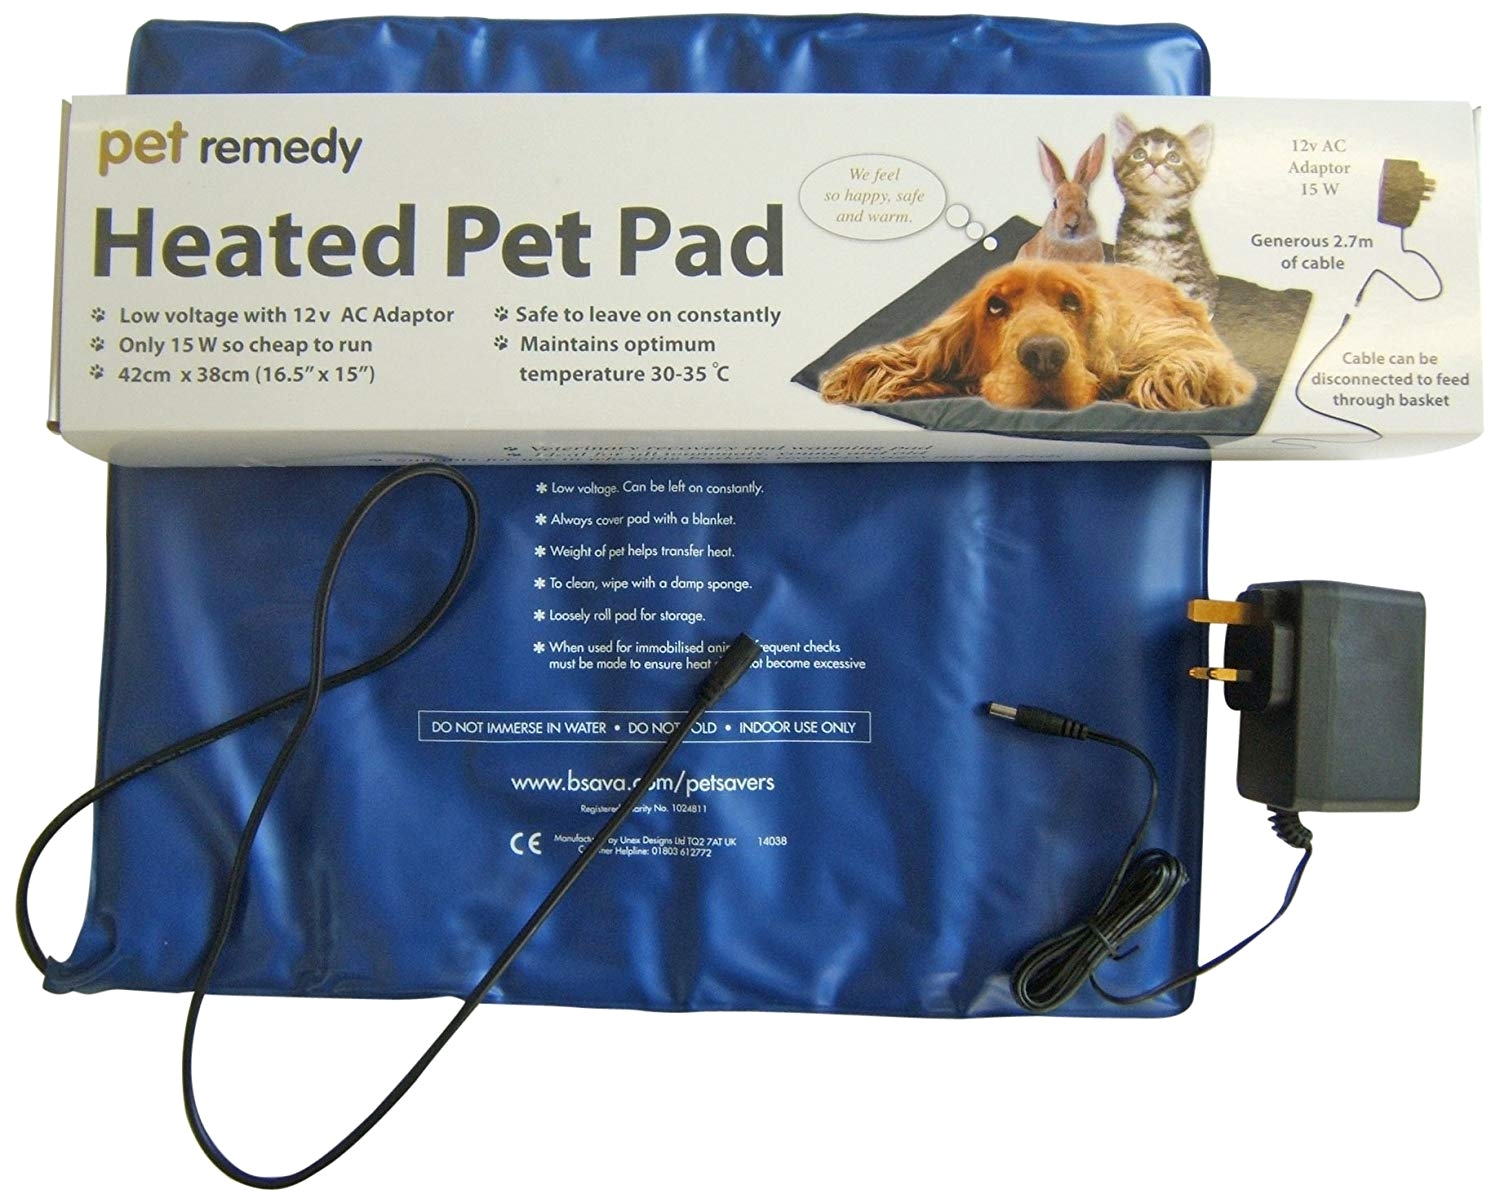 amazon com pet remedy low voltage electrically heated pet pad pet health care supplies pet supplies